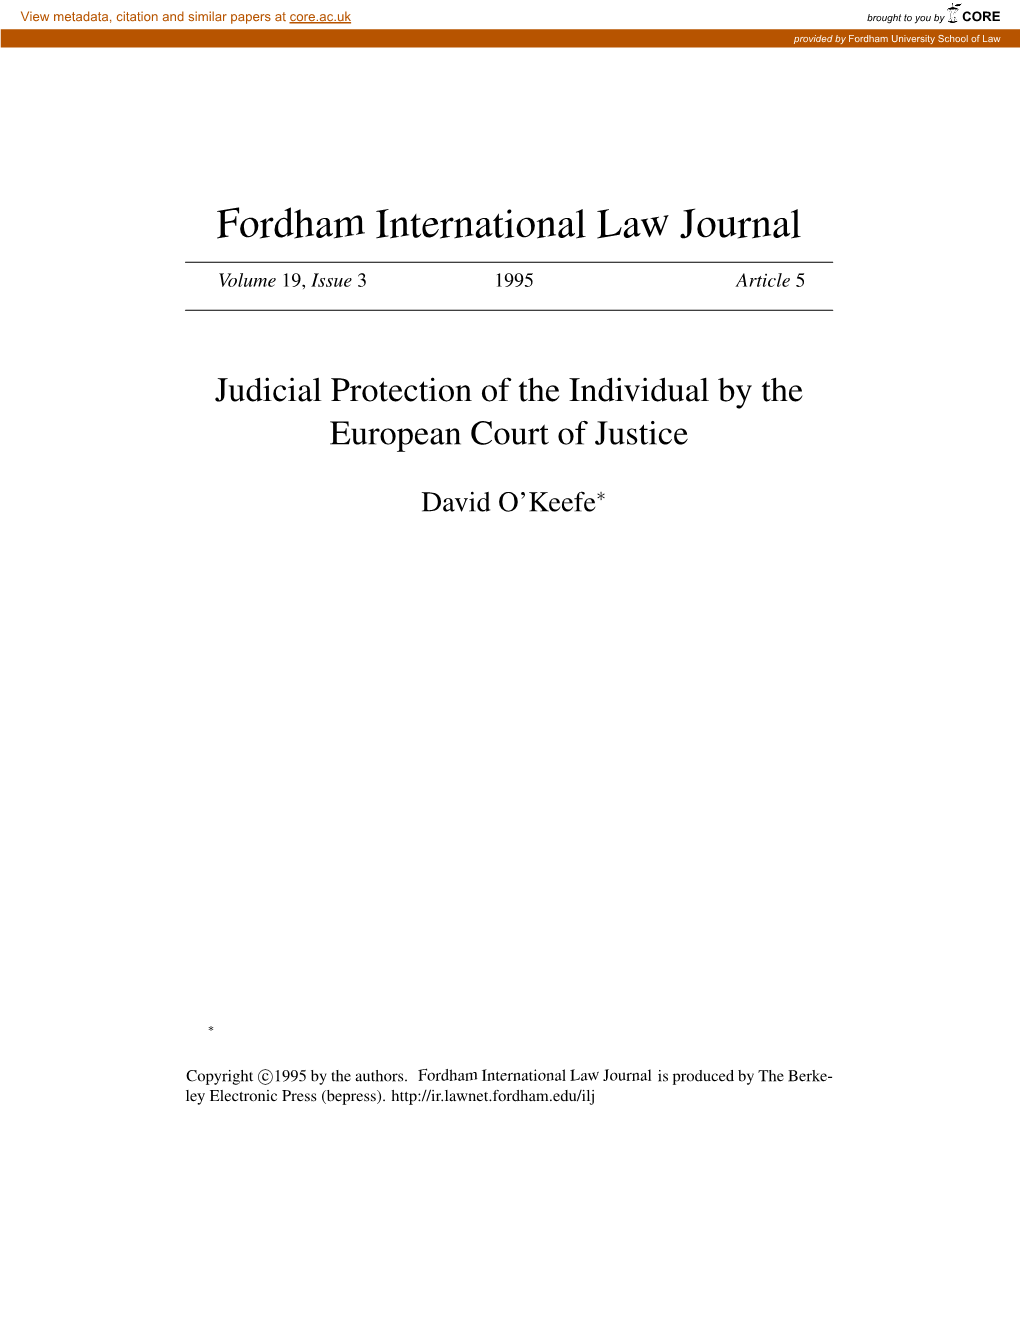 Judicial Protection of the Individual by the European Court of Justice